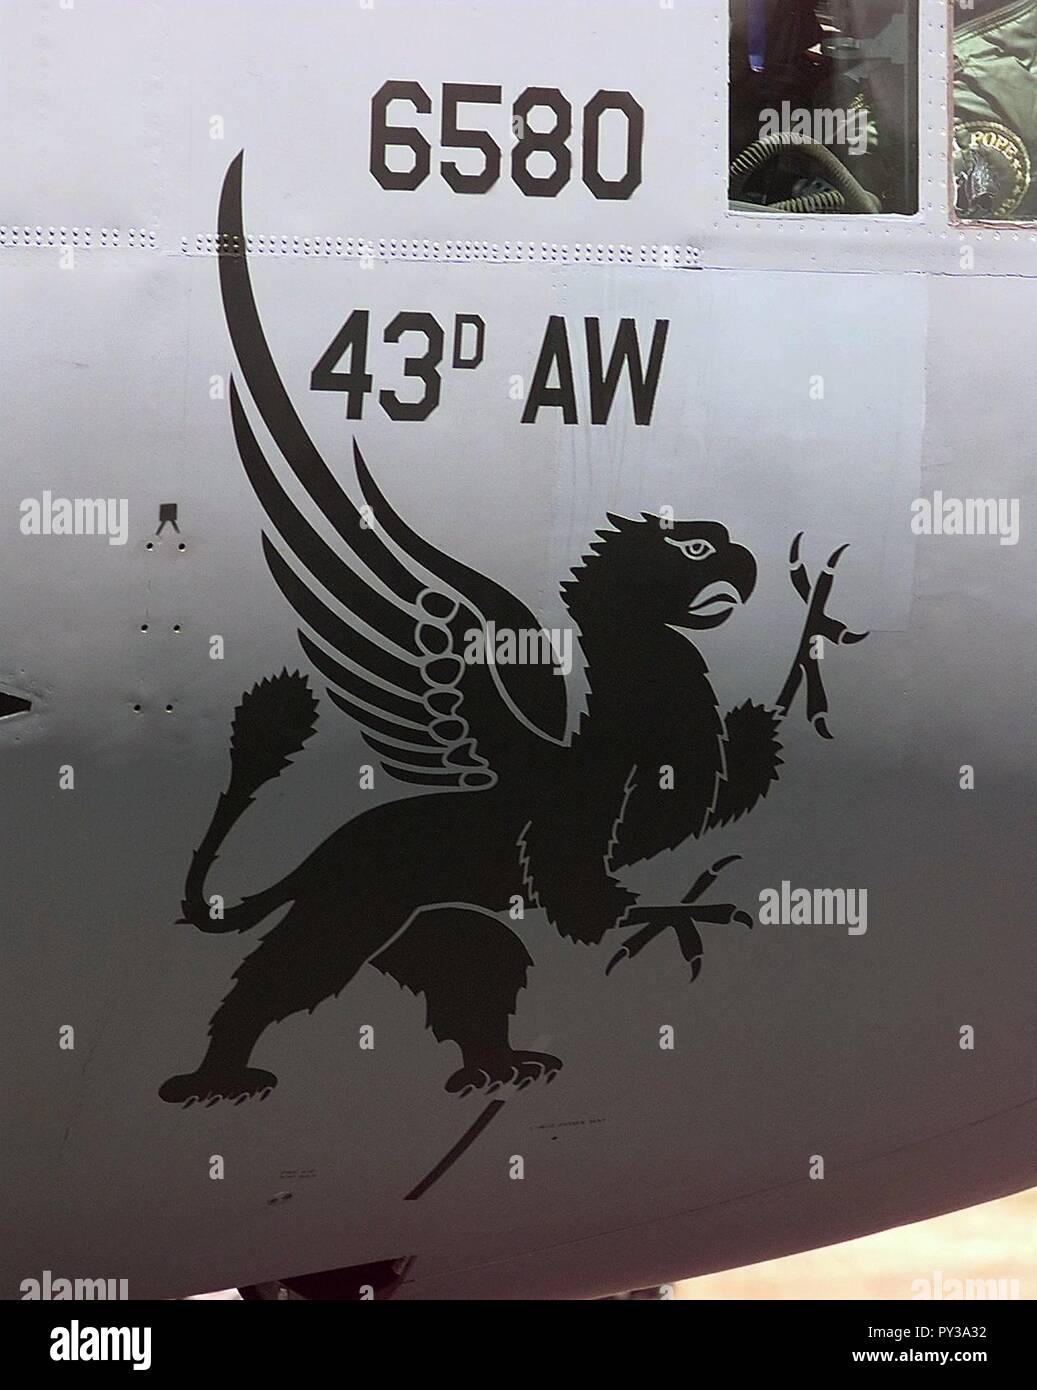 C-130 Griffin Nose Art. Stock Photo